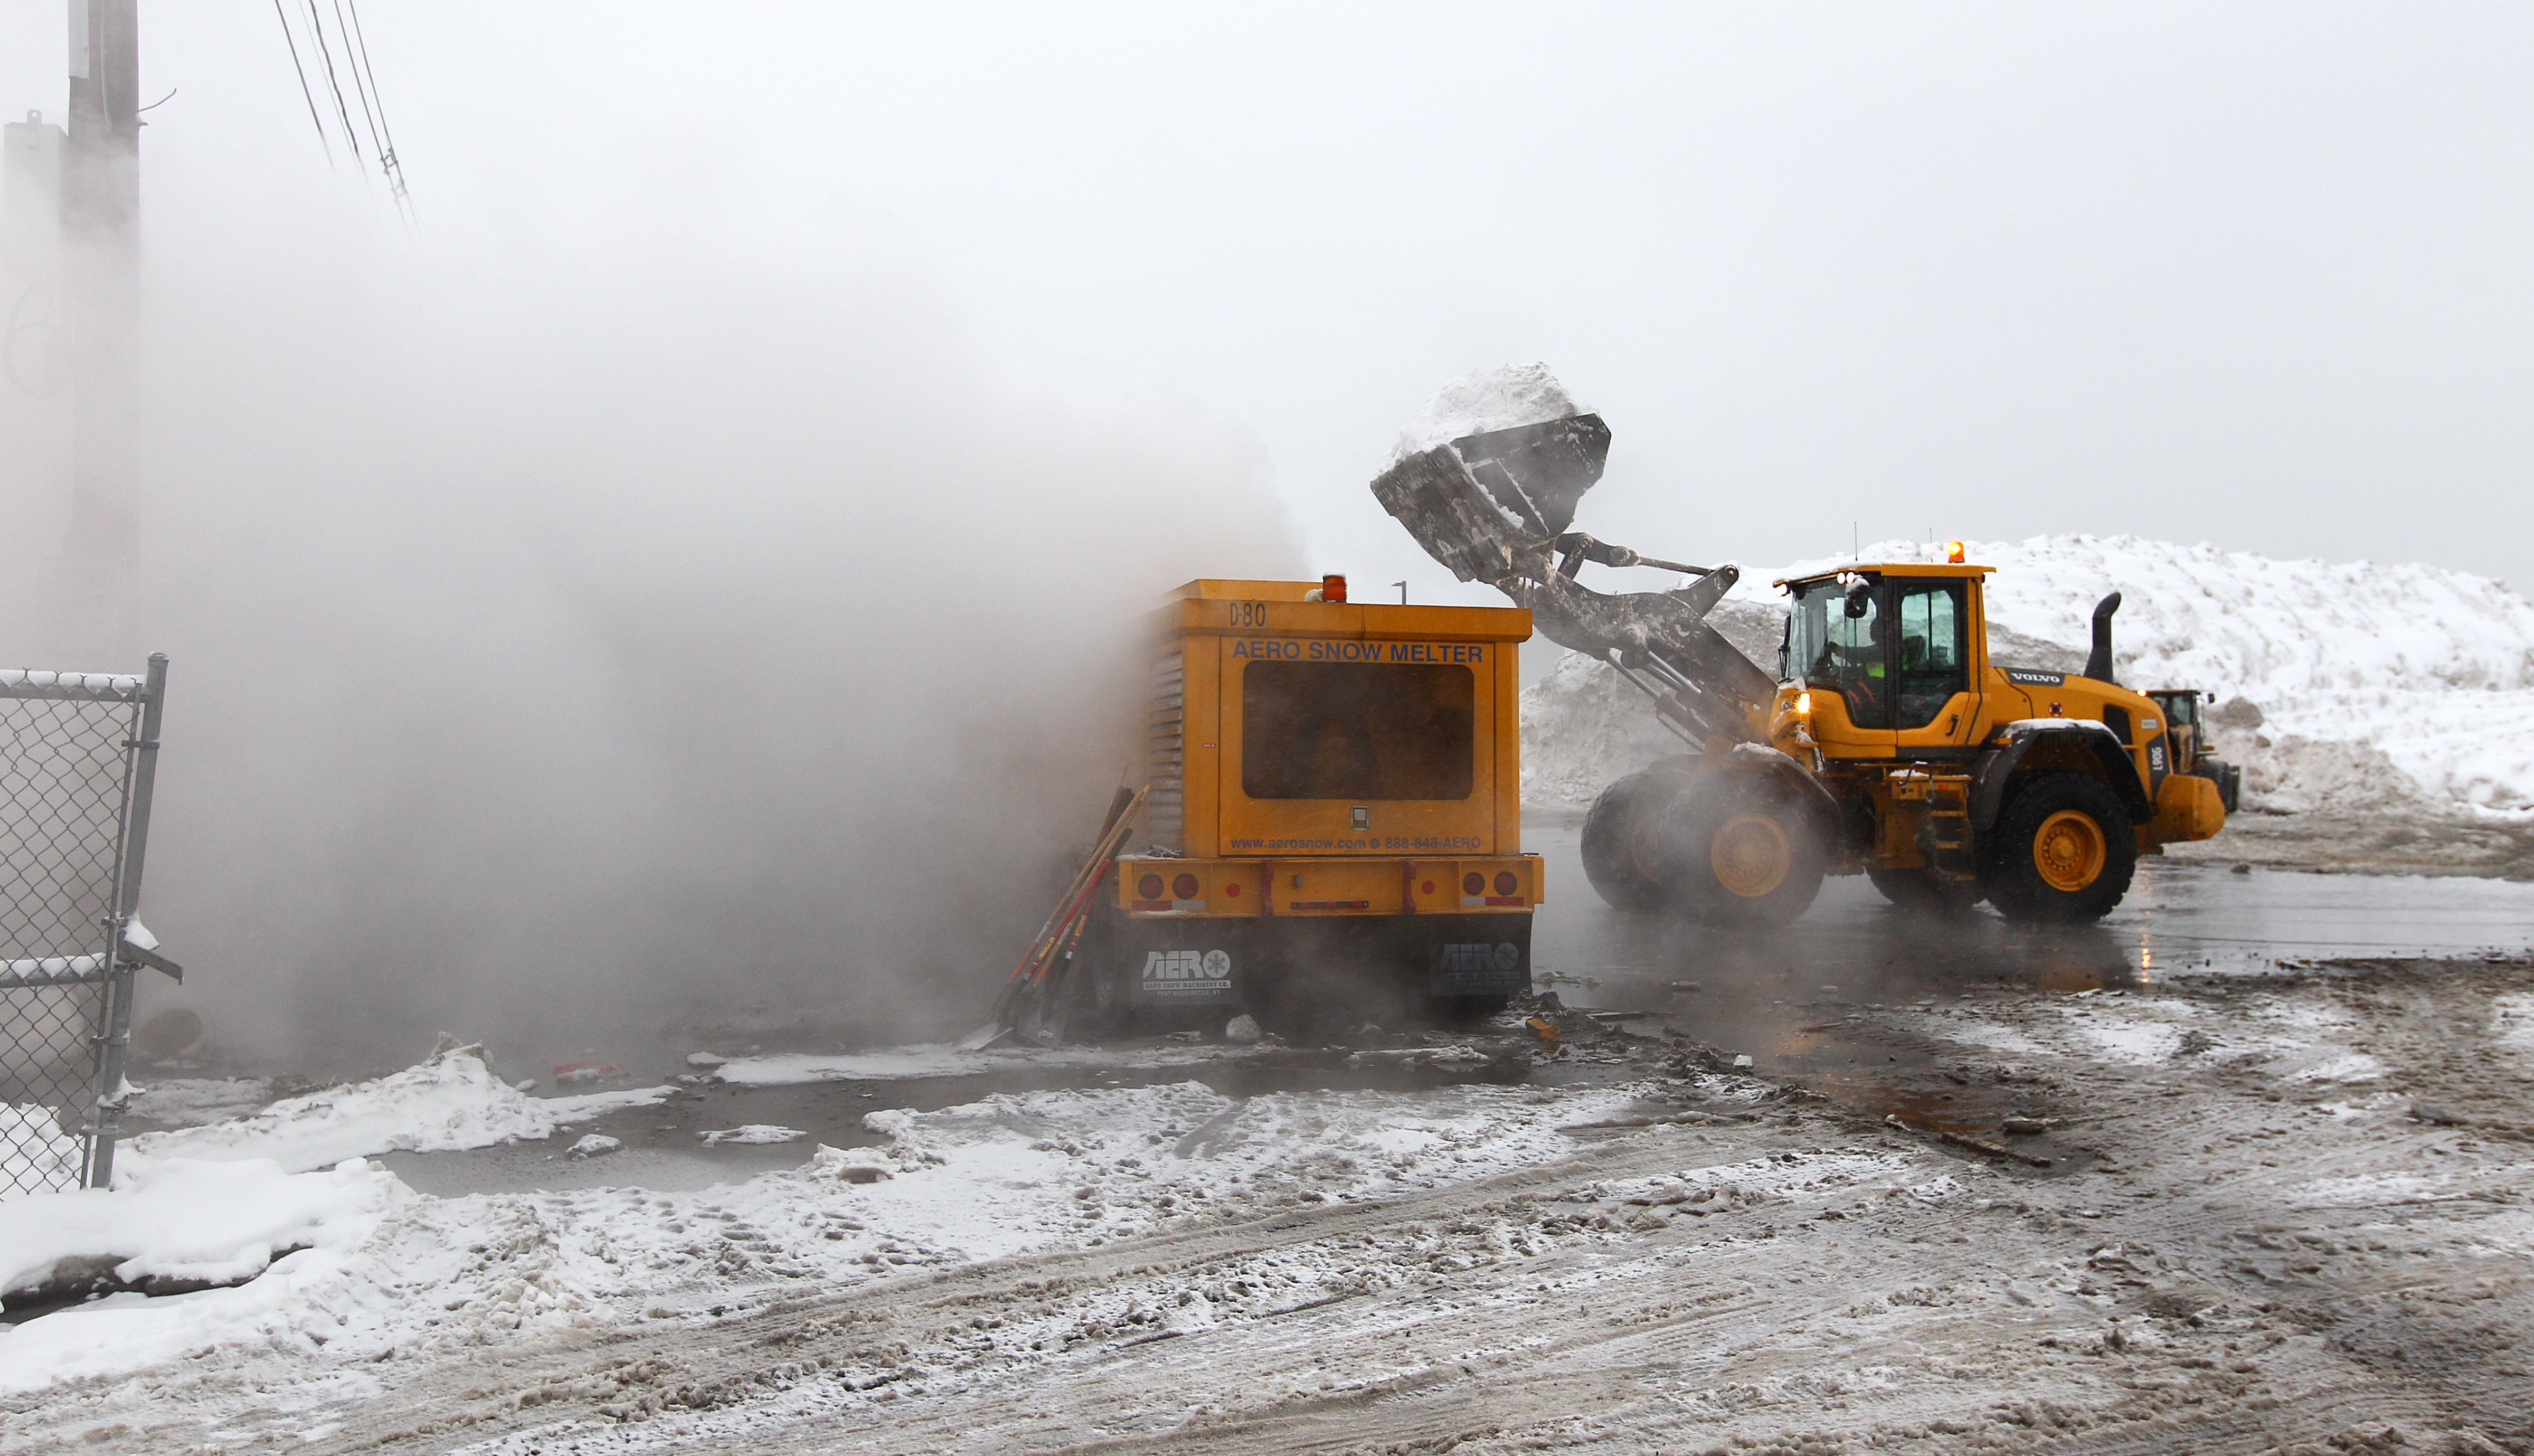 Crews use an Aero Snow Melter to dispatch mounds of snow at the Marine Industrial Park snow farm on Feb. 8, 2015. (Pat Greenhouse—Boston Globe/Getty Images)